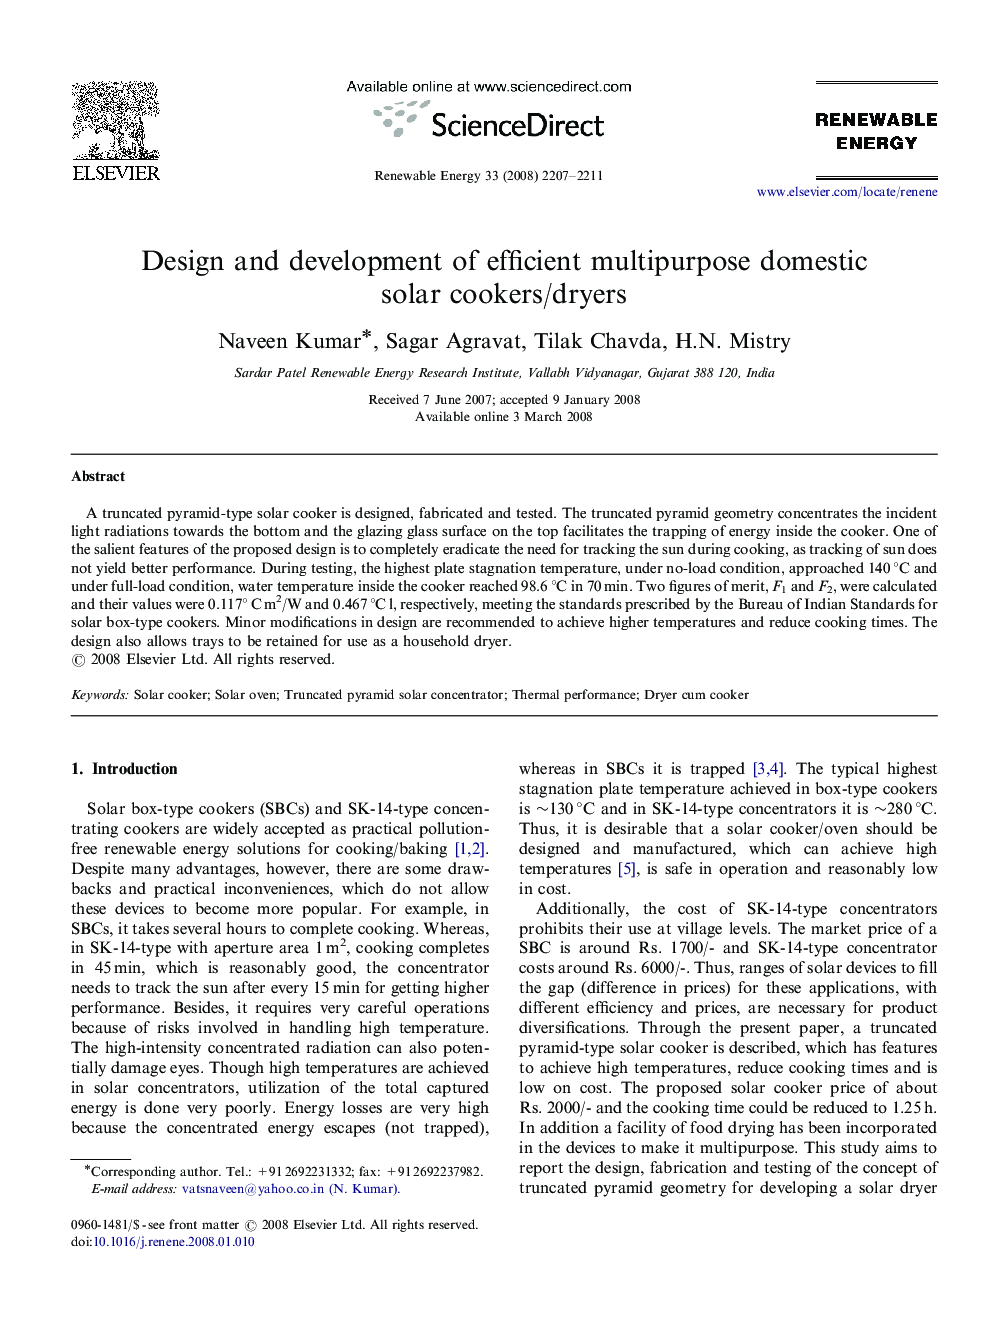 Design and development of efficient multipurpose domestic solar cookers/dryers